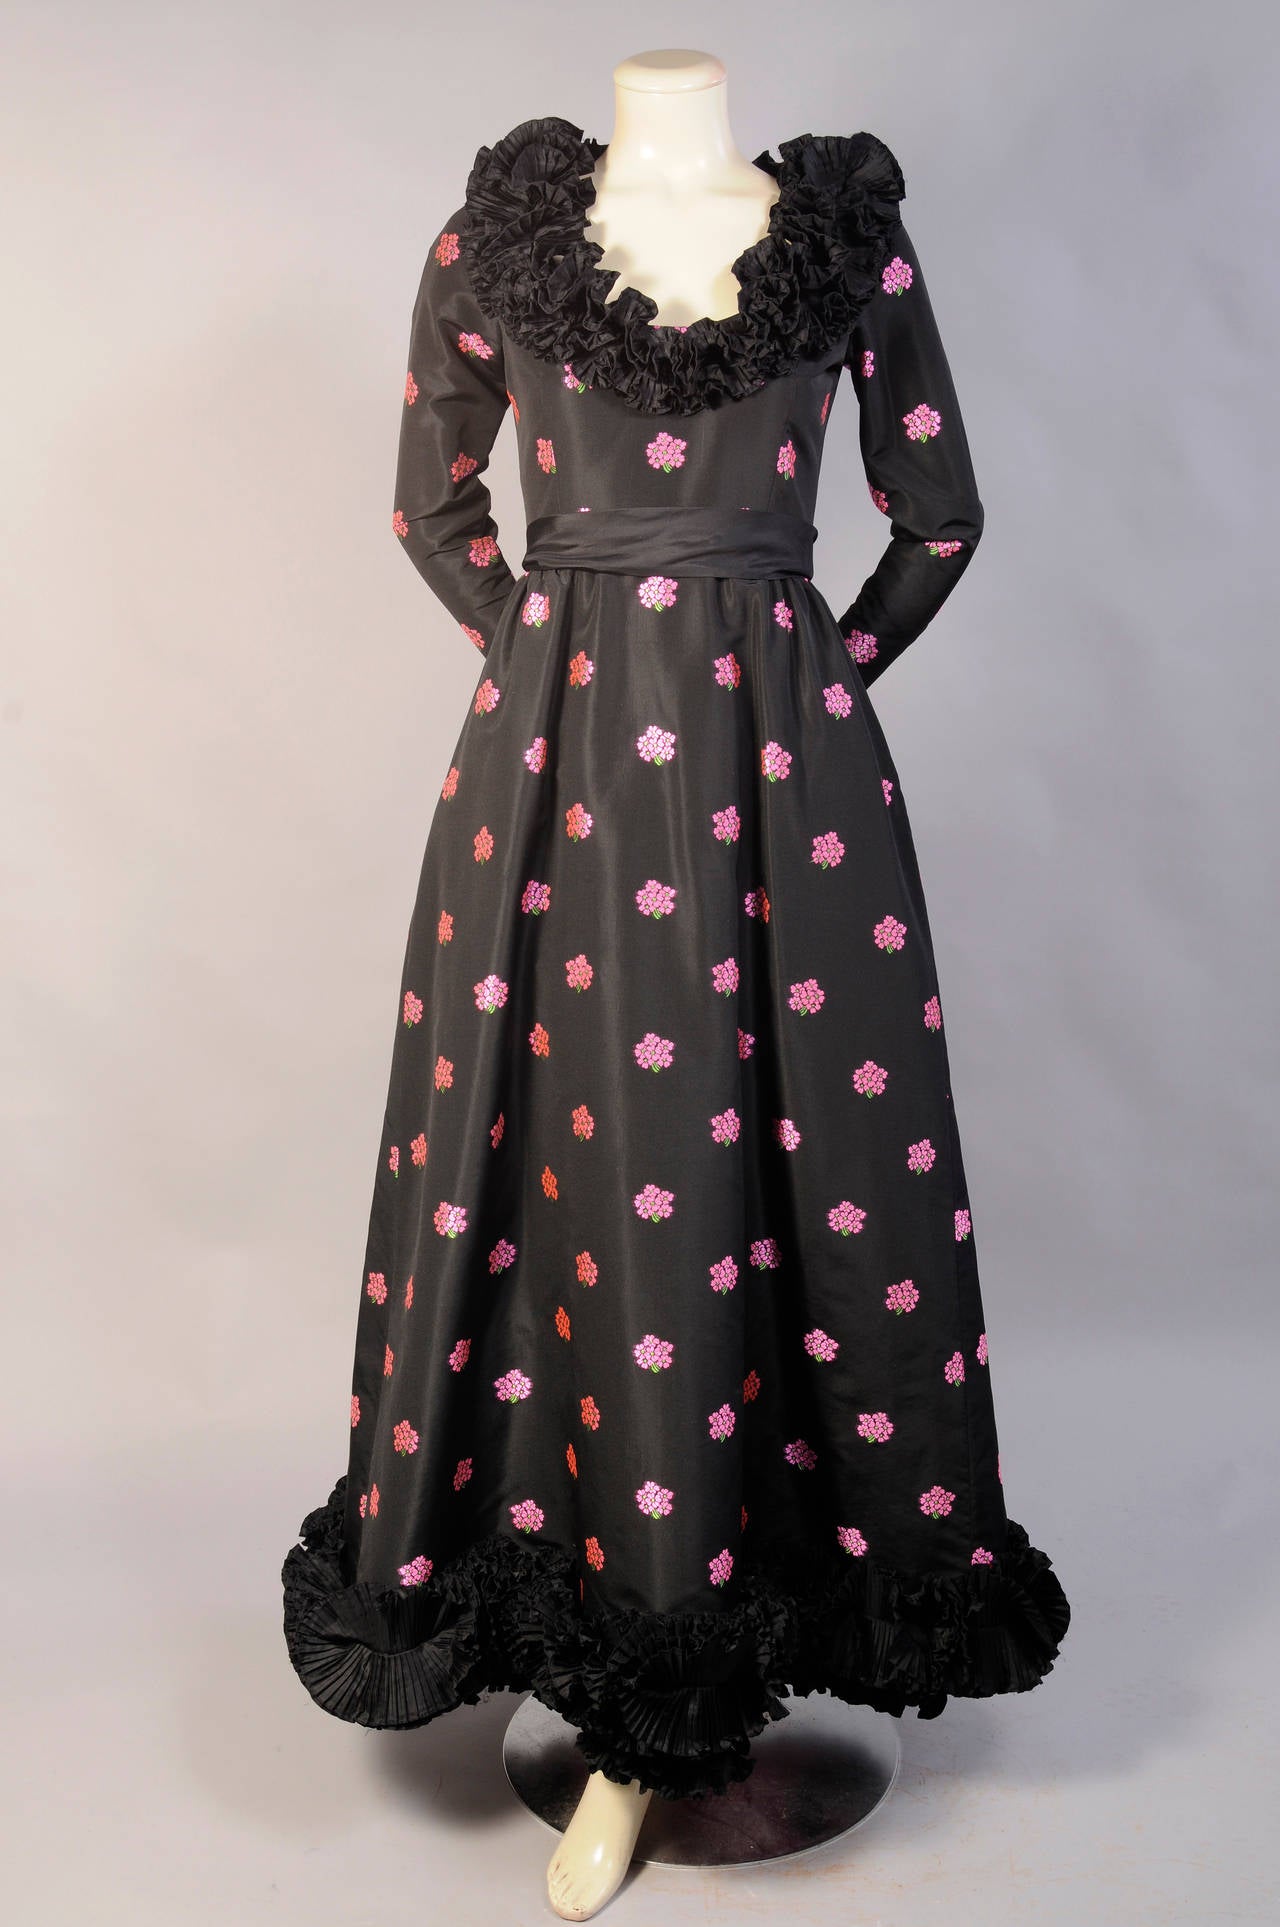 This elegant evening gown designed by YSL in the early 1970's is a striking combination of woven pink and green floral bouquets, black silk and a fabulous shocking pink ruffled petticoat. The dress has a low ruffle edged neckline and a deep ruffle